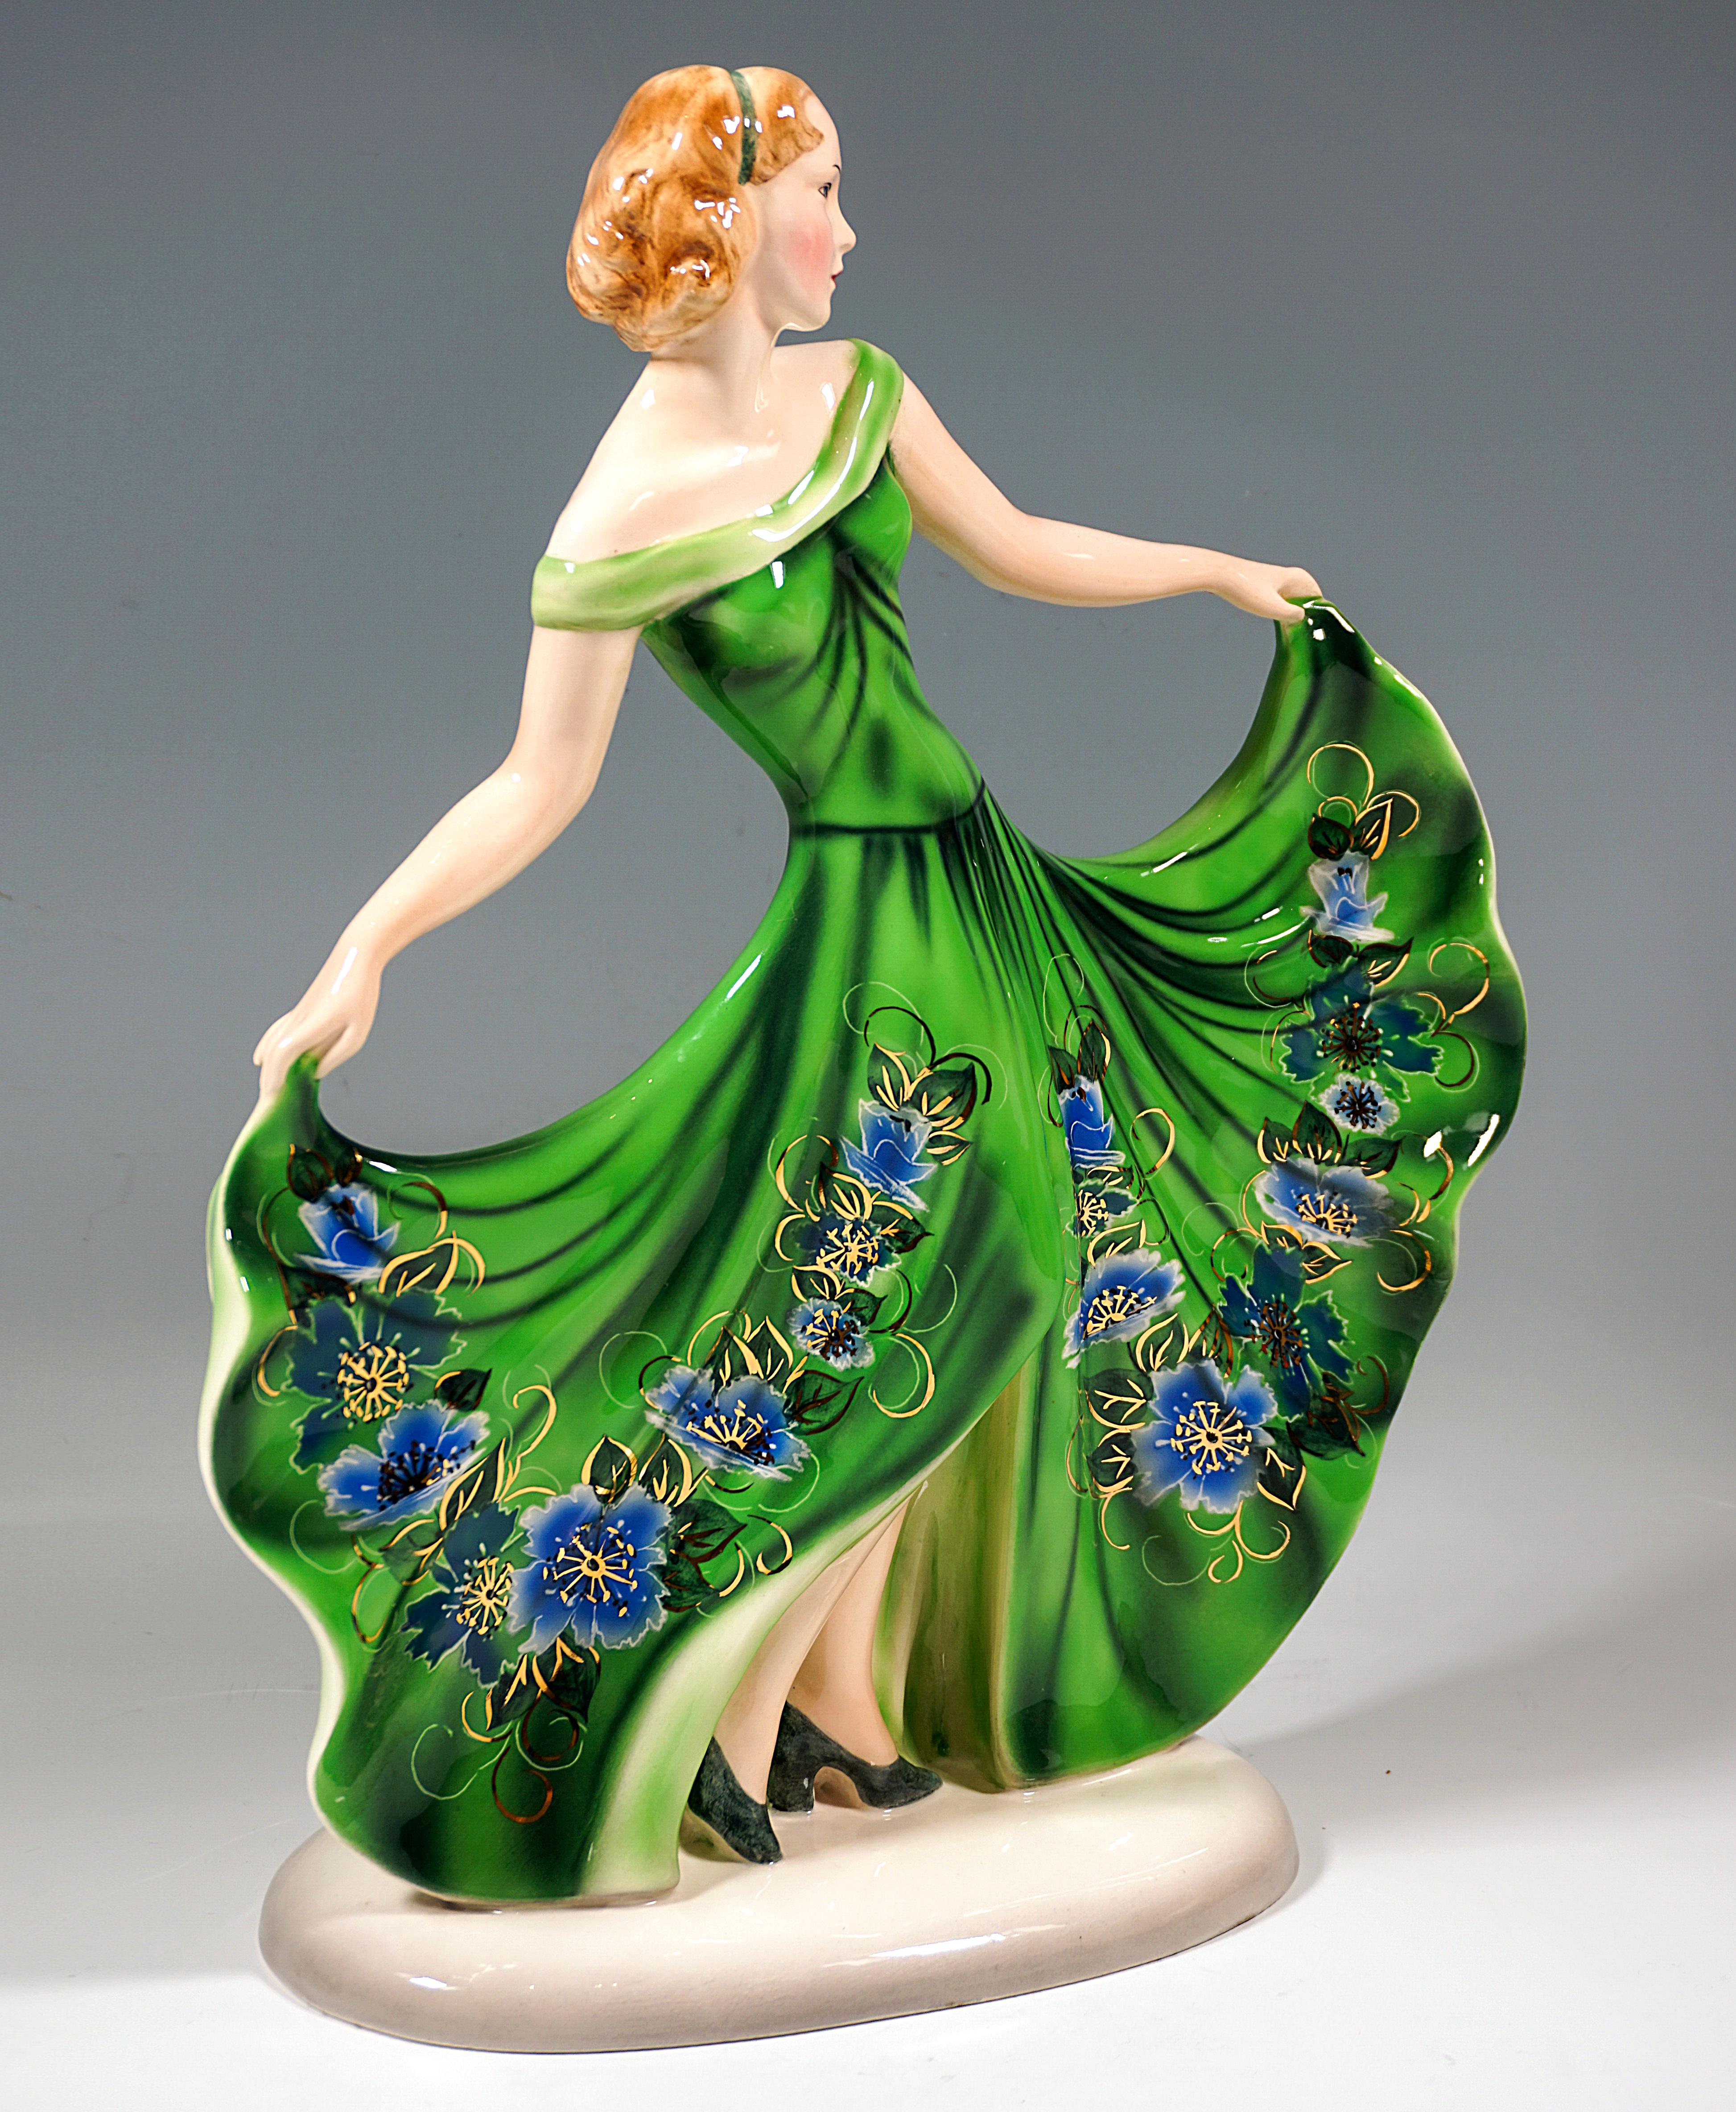 Very rare Goldscheider Vienna ceramic figure of the 1930s:
Young pretty lady, chin-length hair fastened with a hair band, posing in a long green dress with a wide, high-slit skirt decorated with flowers, which she holds up with both arms stretched